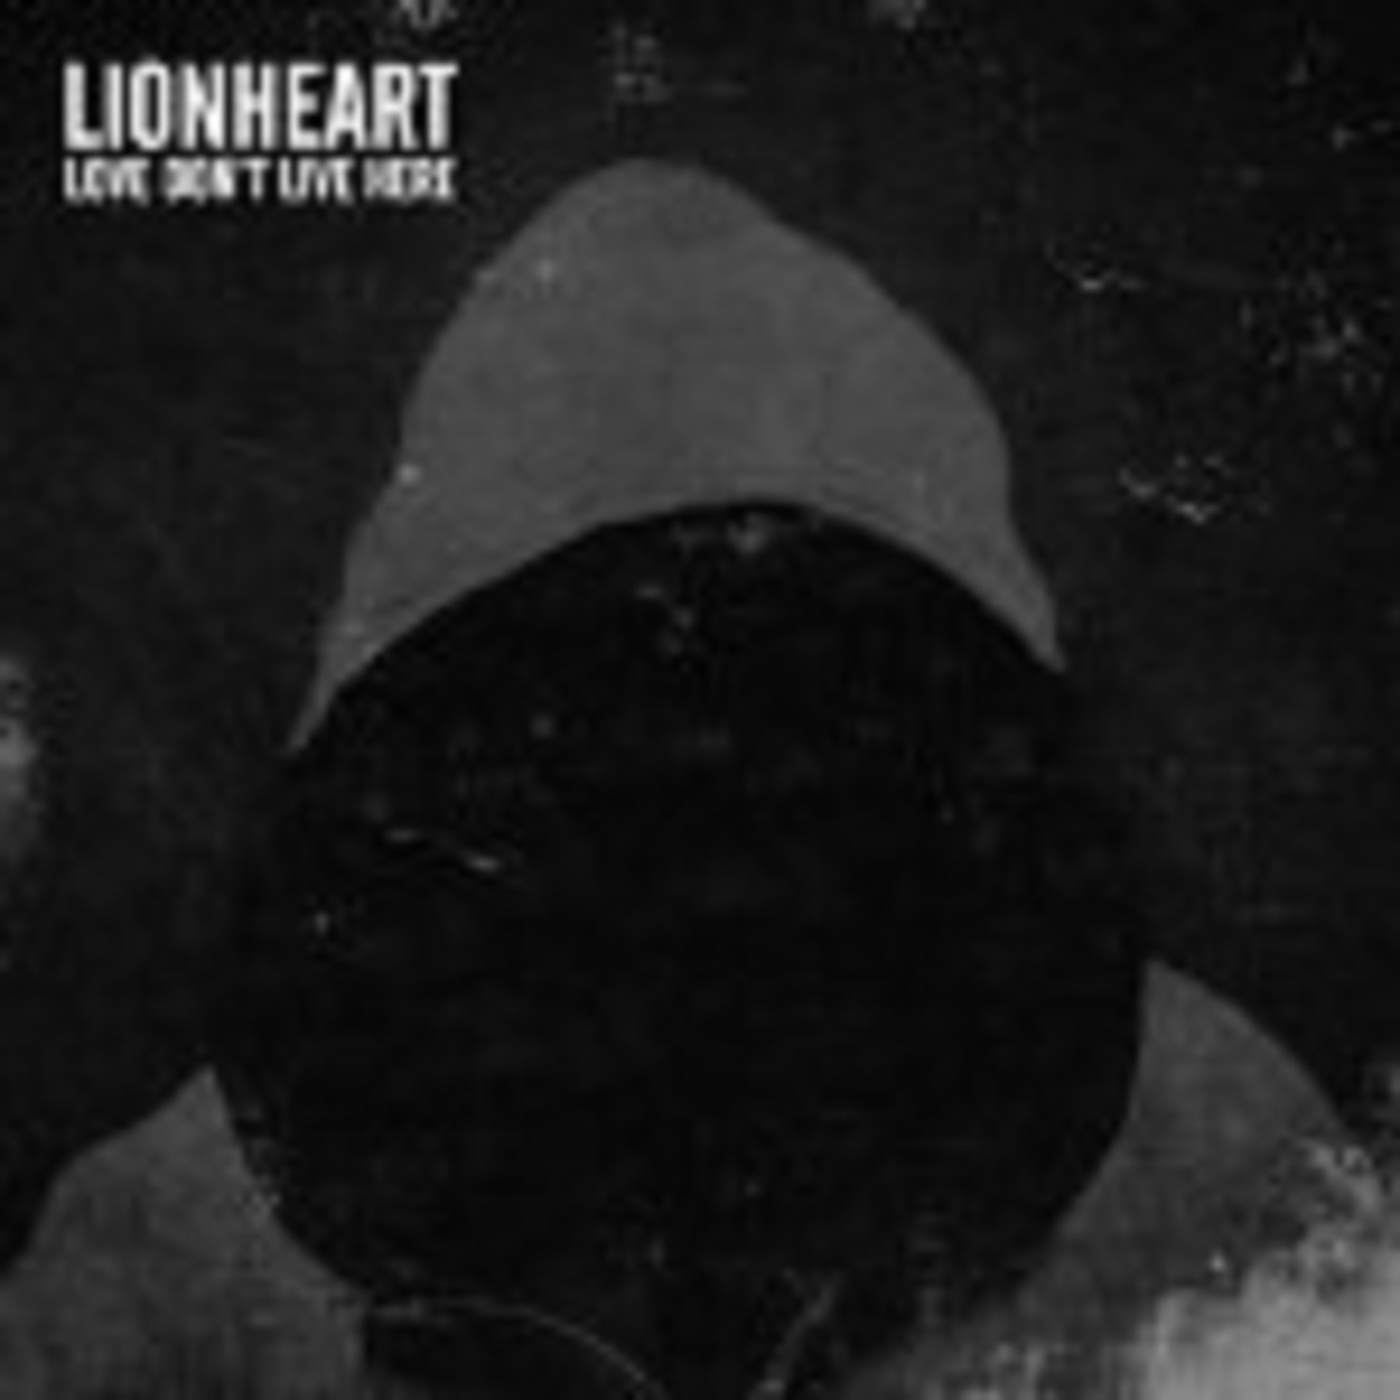 Lionheart LOVE DON'T LIVE HERE CD